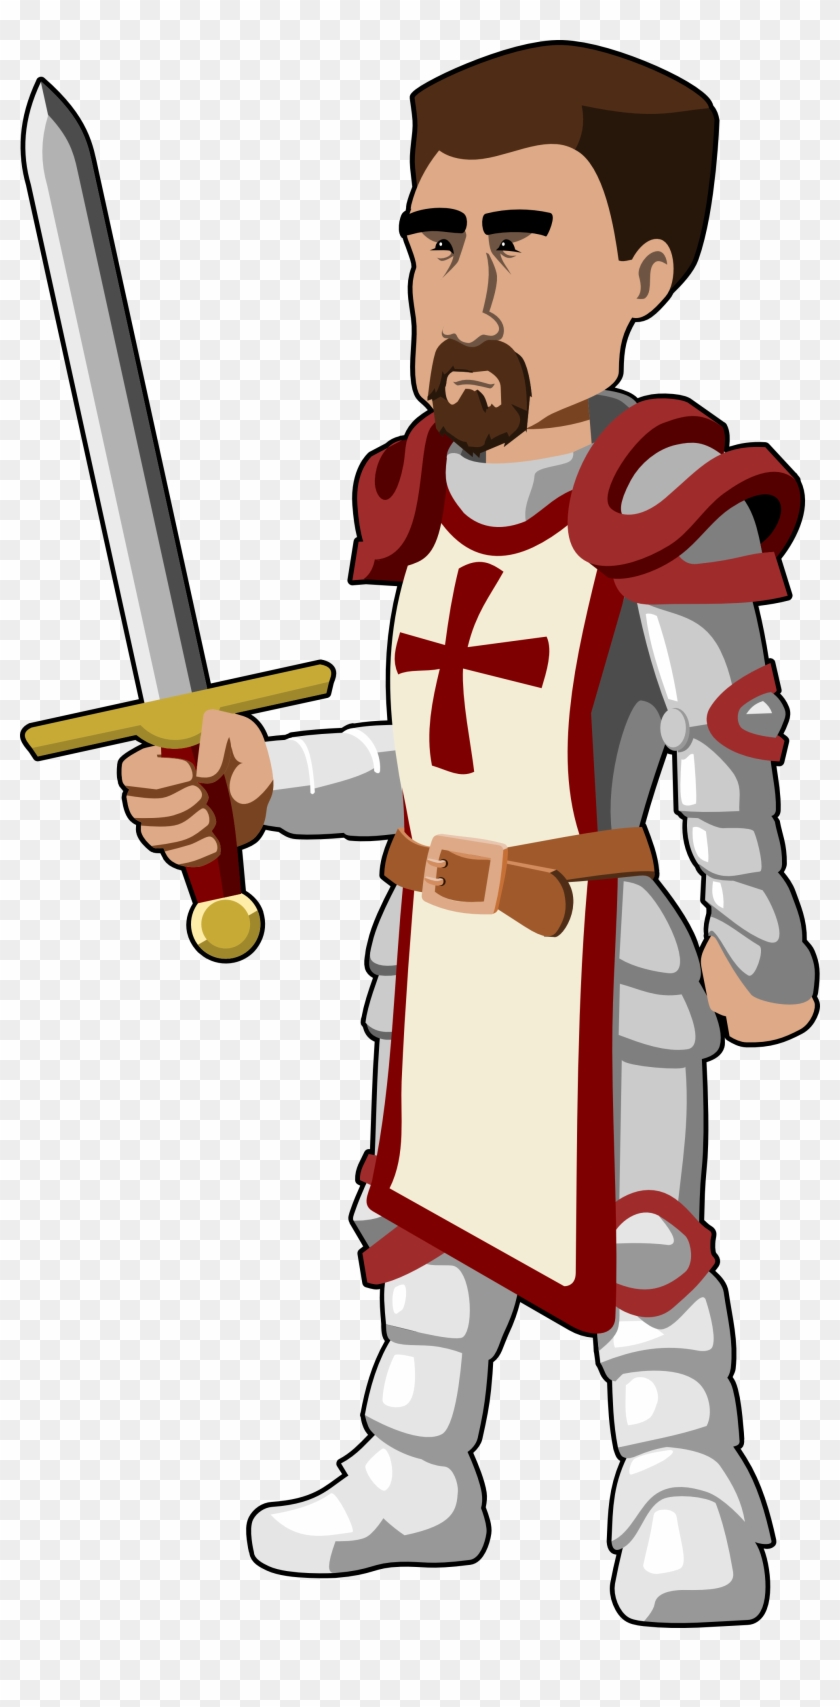 Lord Clipart - Lord - Medieval Lord Clipart #442568